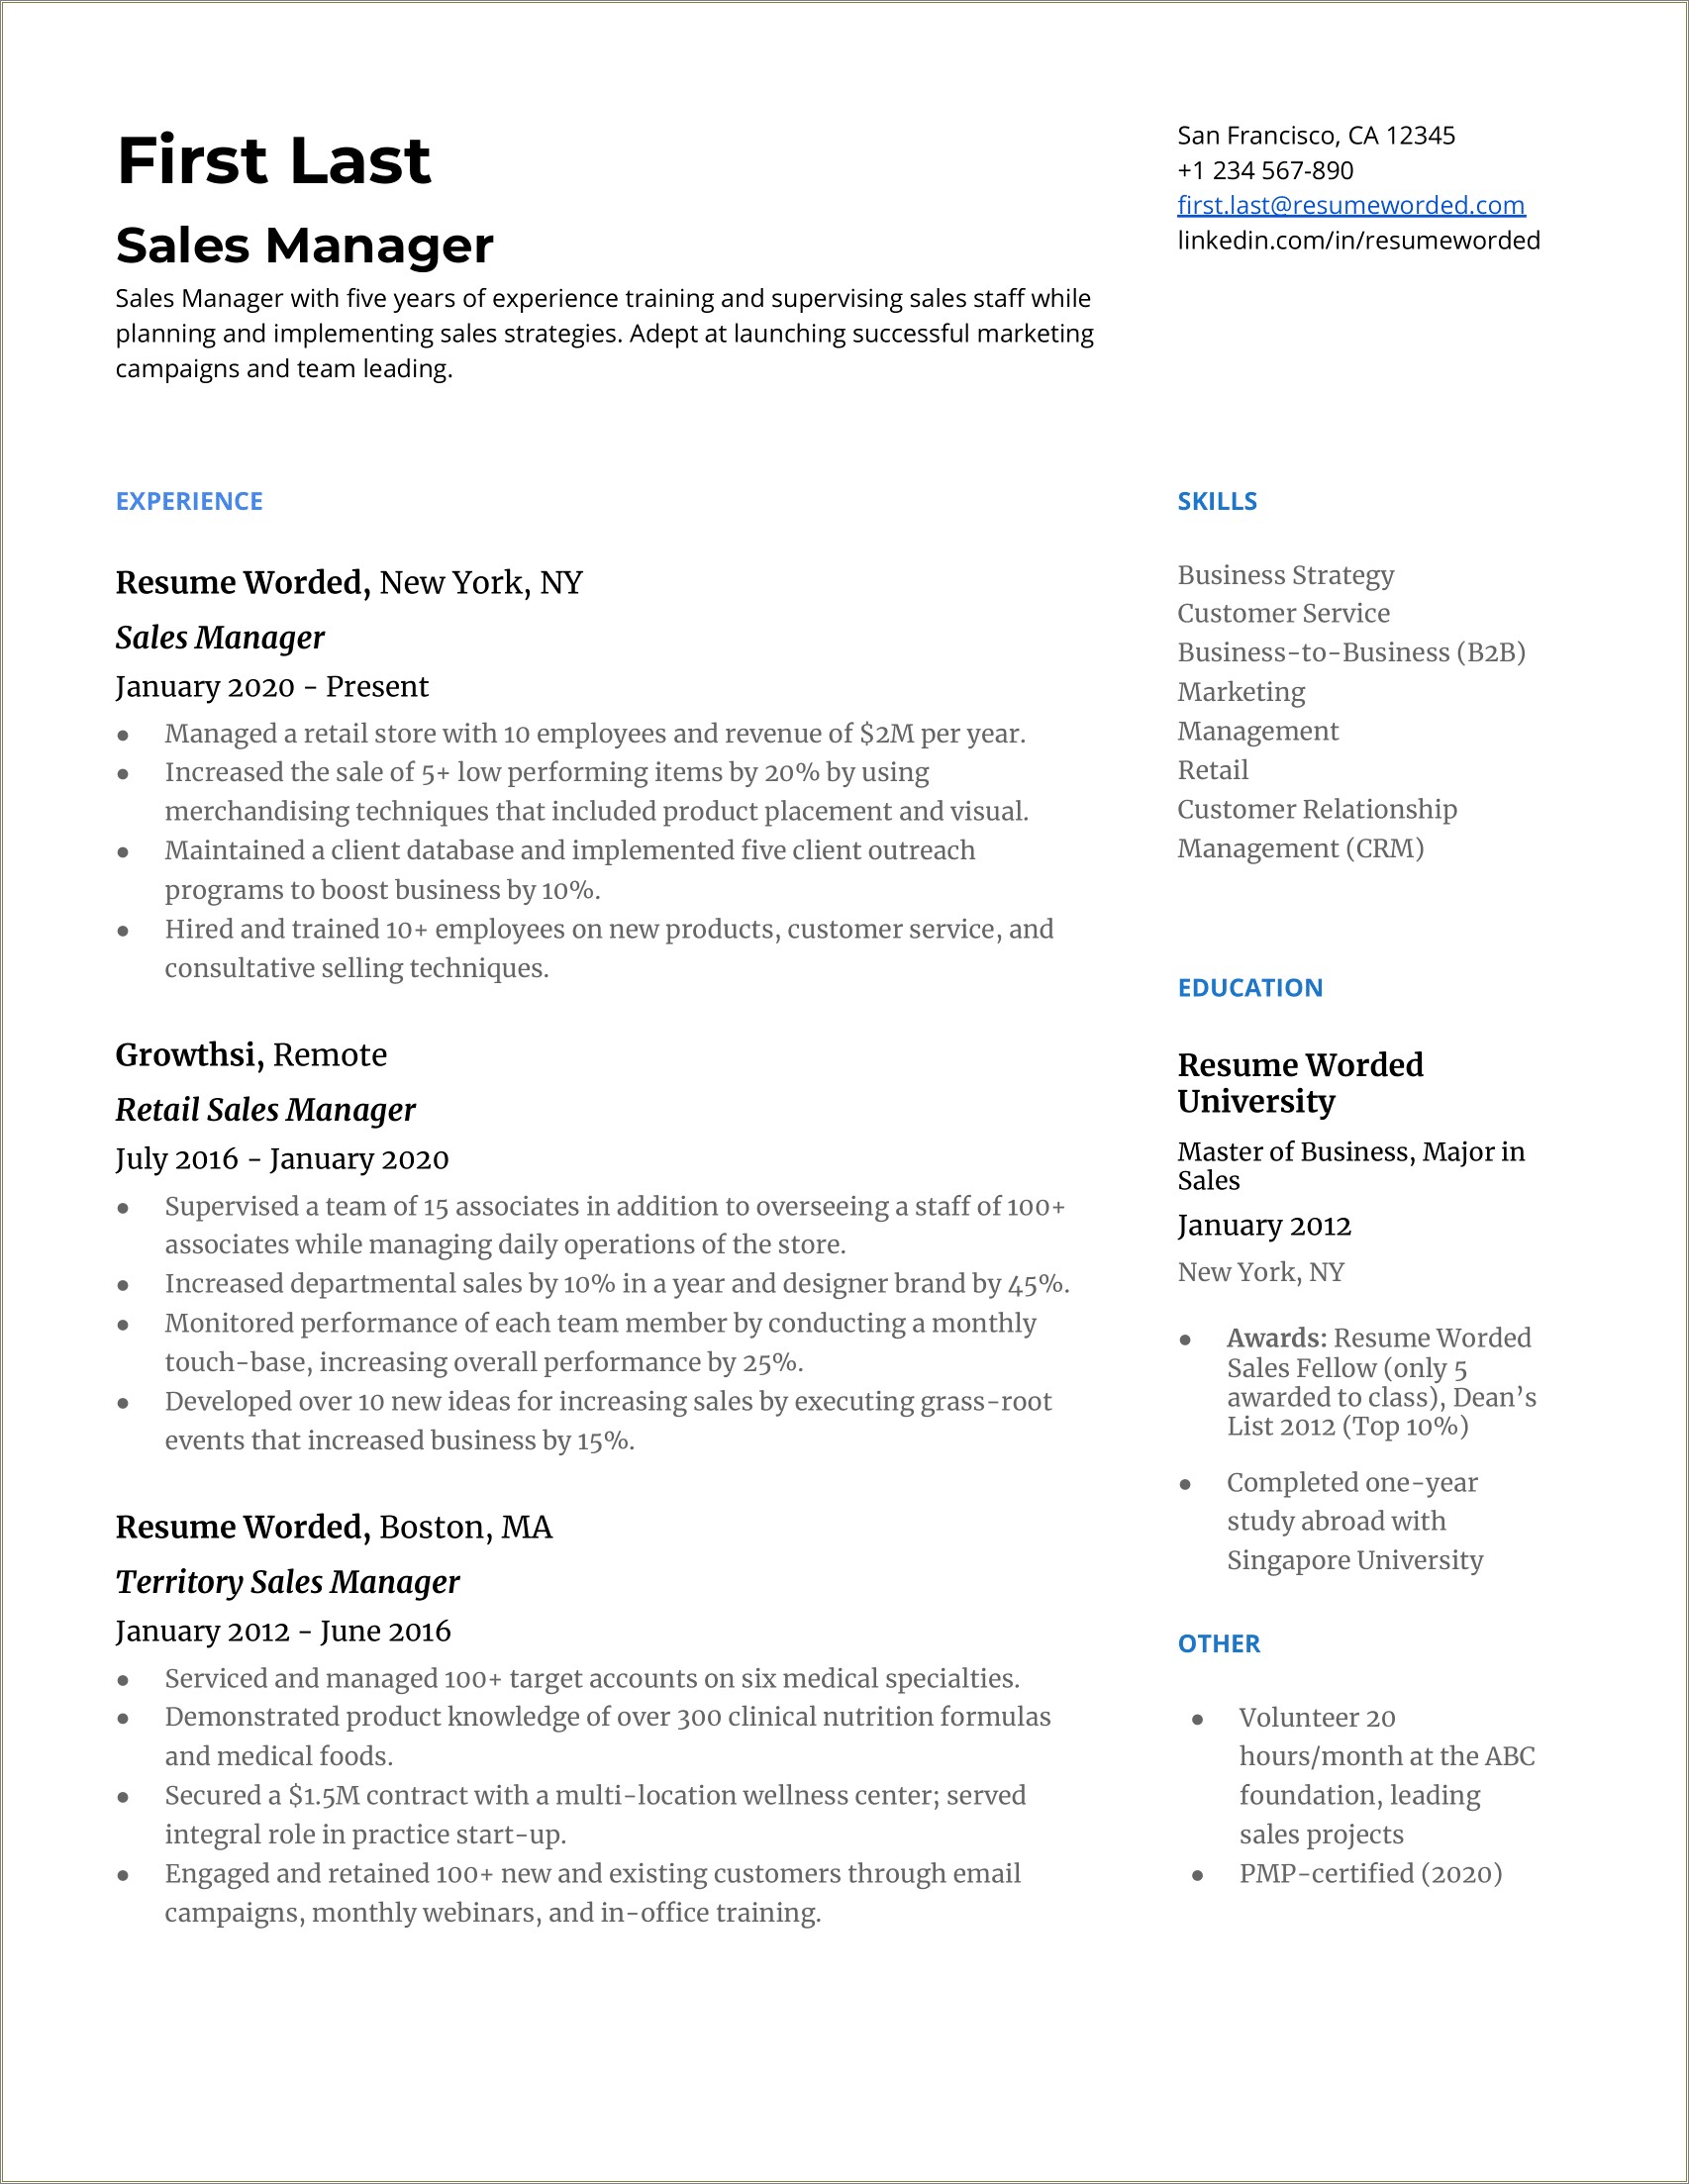 Resume For The Post Of Sales Manager